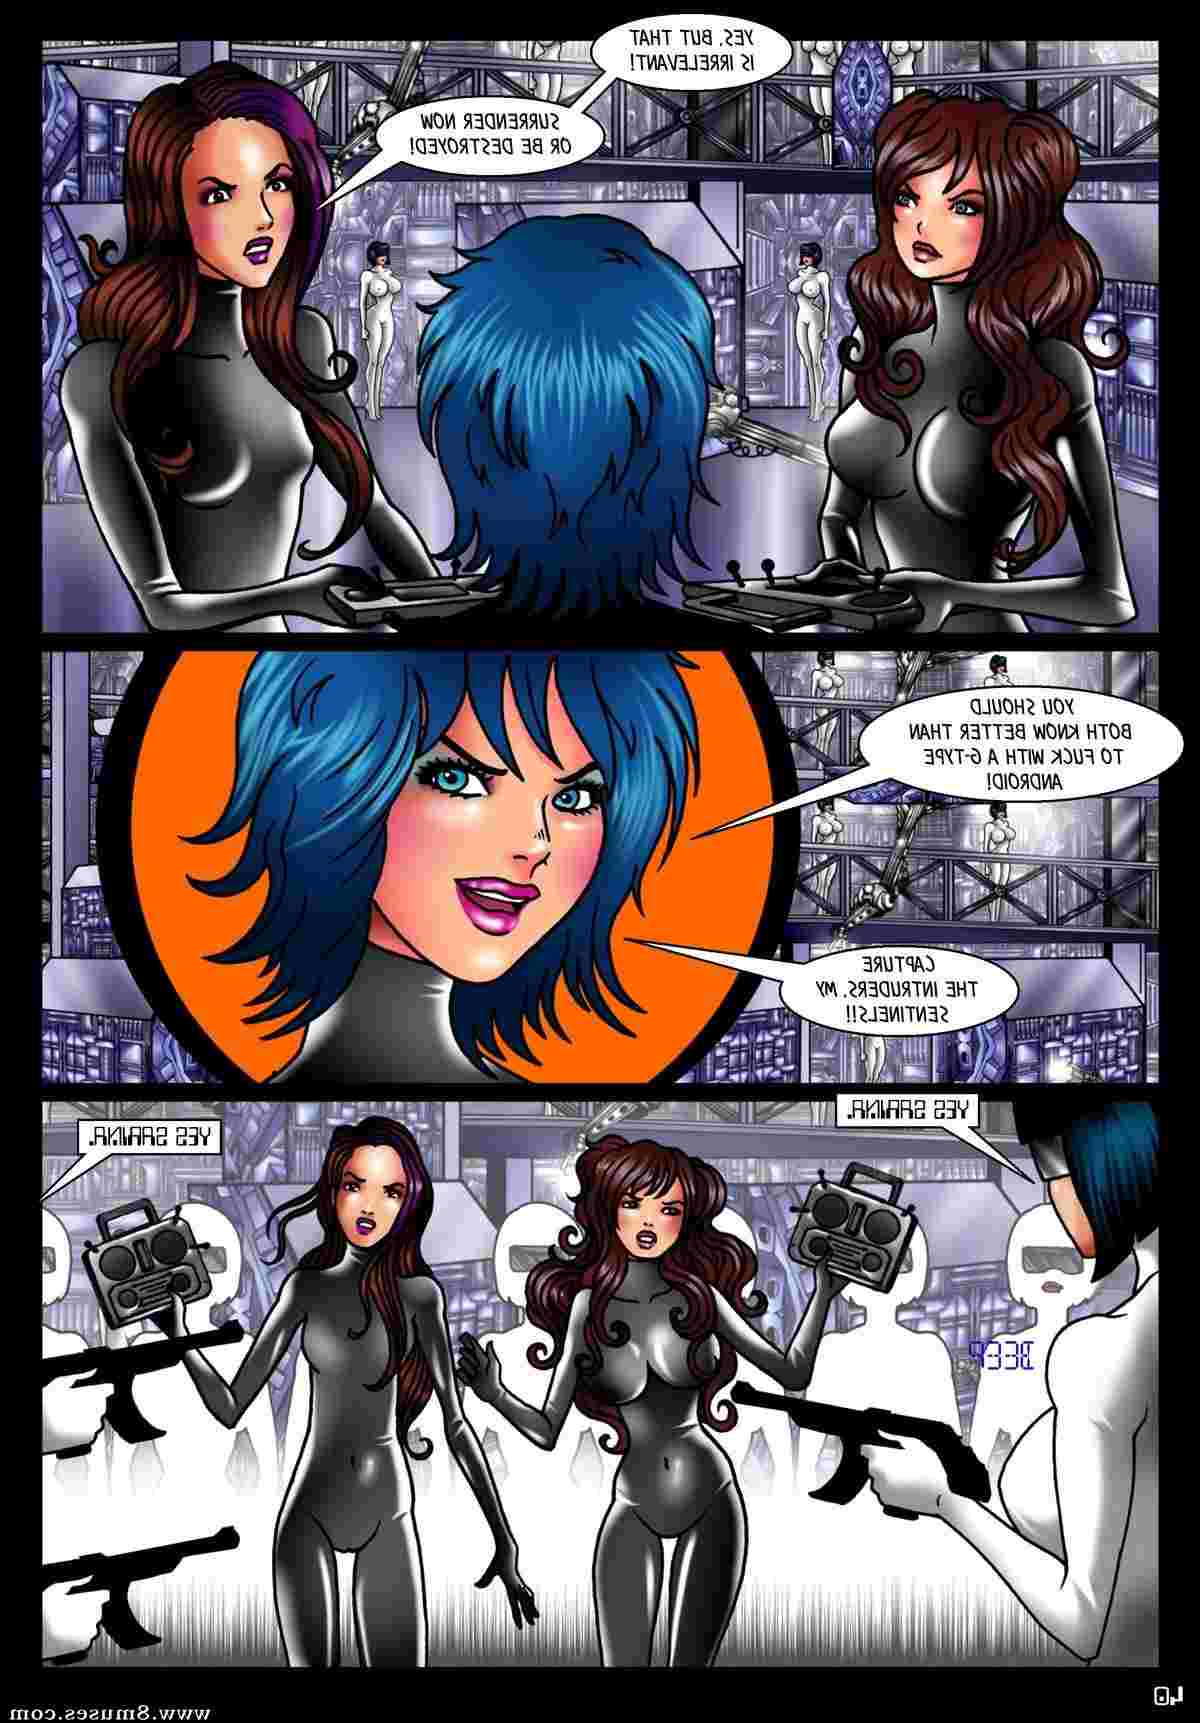 Various-Authors/AB-Lust/Shemale-Android-Sex-Sirens-Renegades Shemale_Android_Sex_Sirens_-_Renegades__8muses_-_Sex_and_Porn_Comics_41.jpg